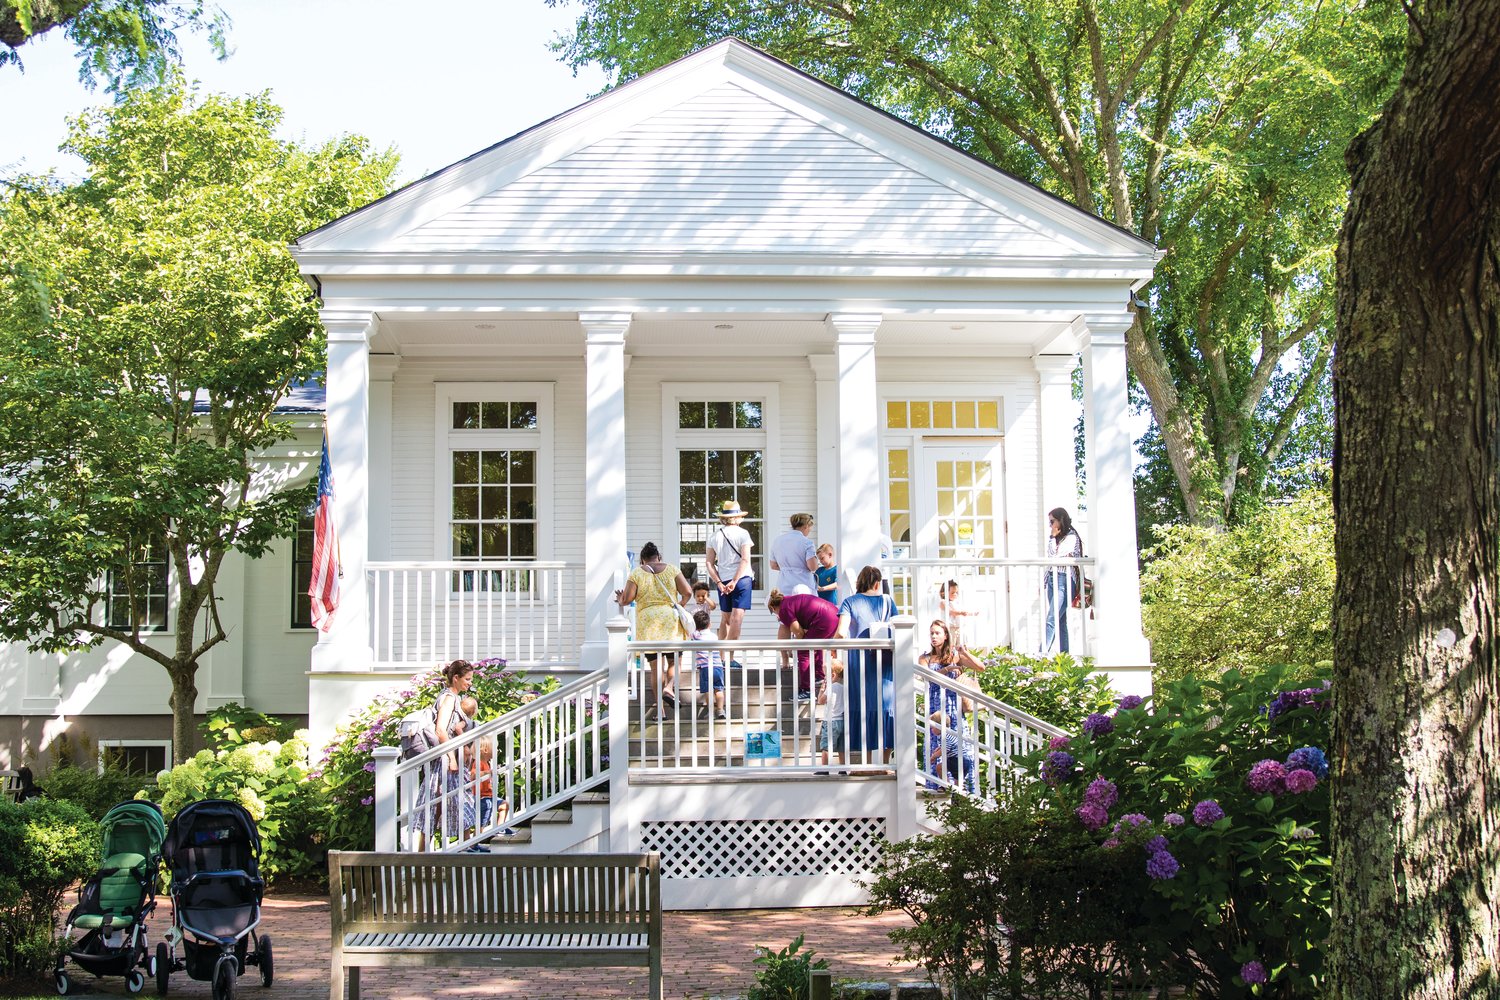 The Atheneum’s Weezie Library for Children, built in 1996, will host a birthday celebration tomorrow in the library’s garden.